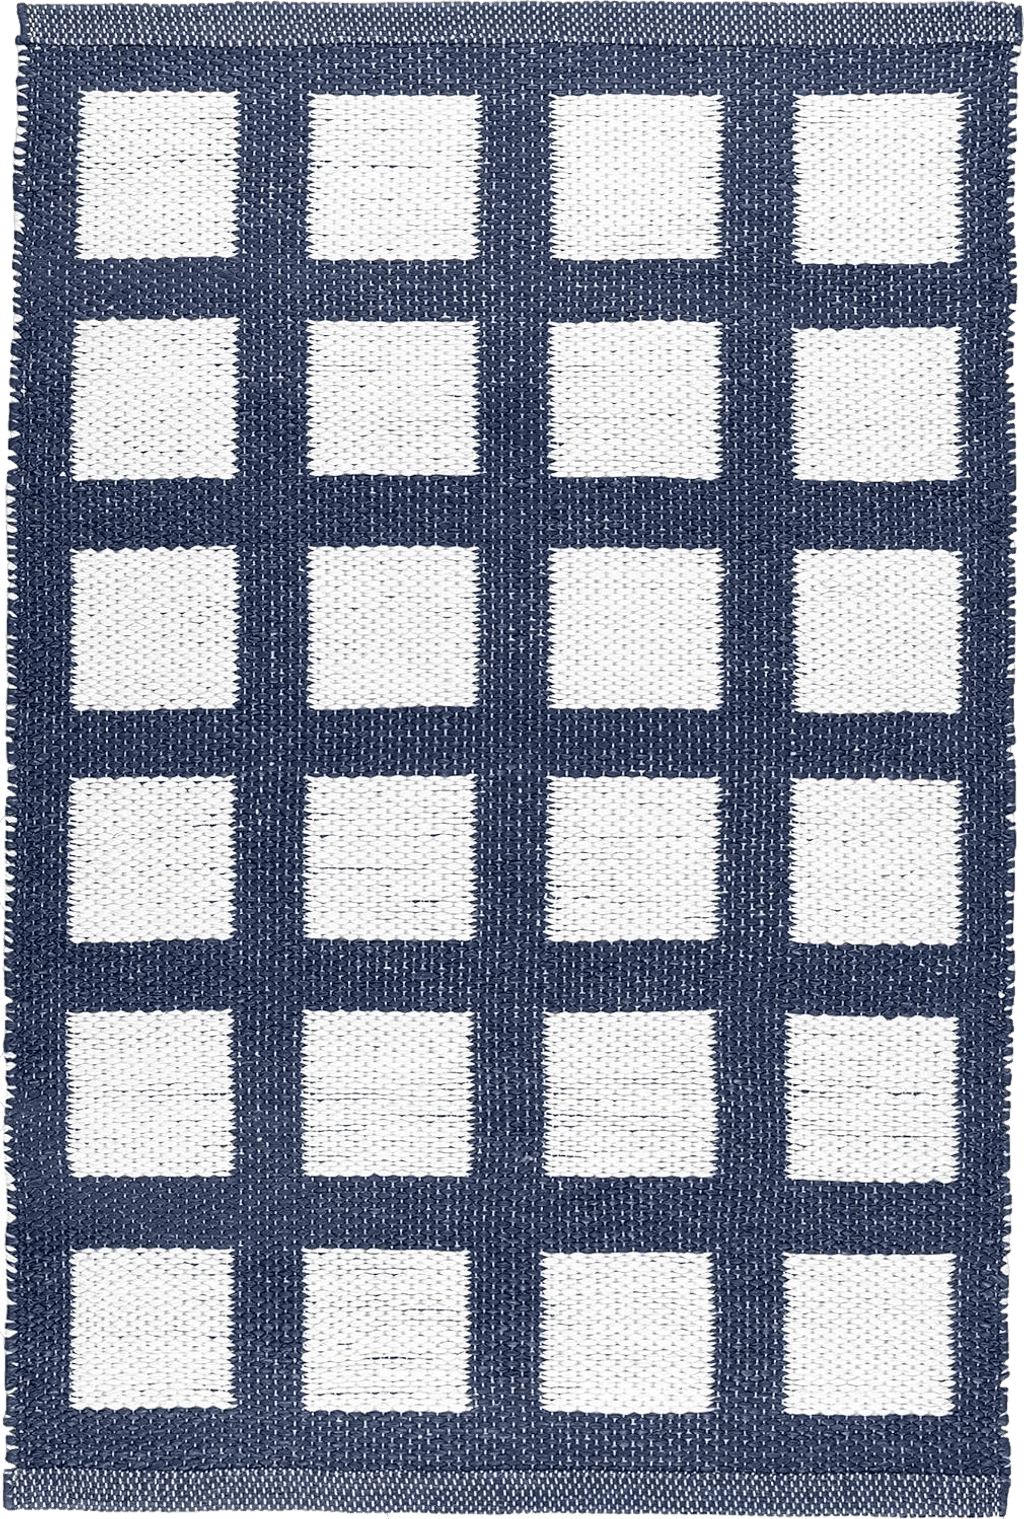 Dash and Albert Paver Navy Handwoven Indoor/Outdoor Rug, 2 X 3 Feet, White/Blue Geometric Pattern